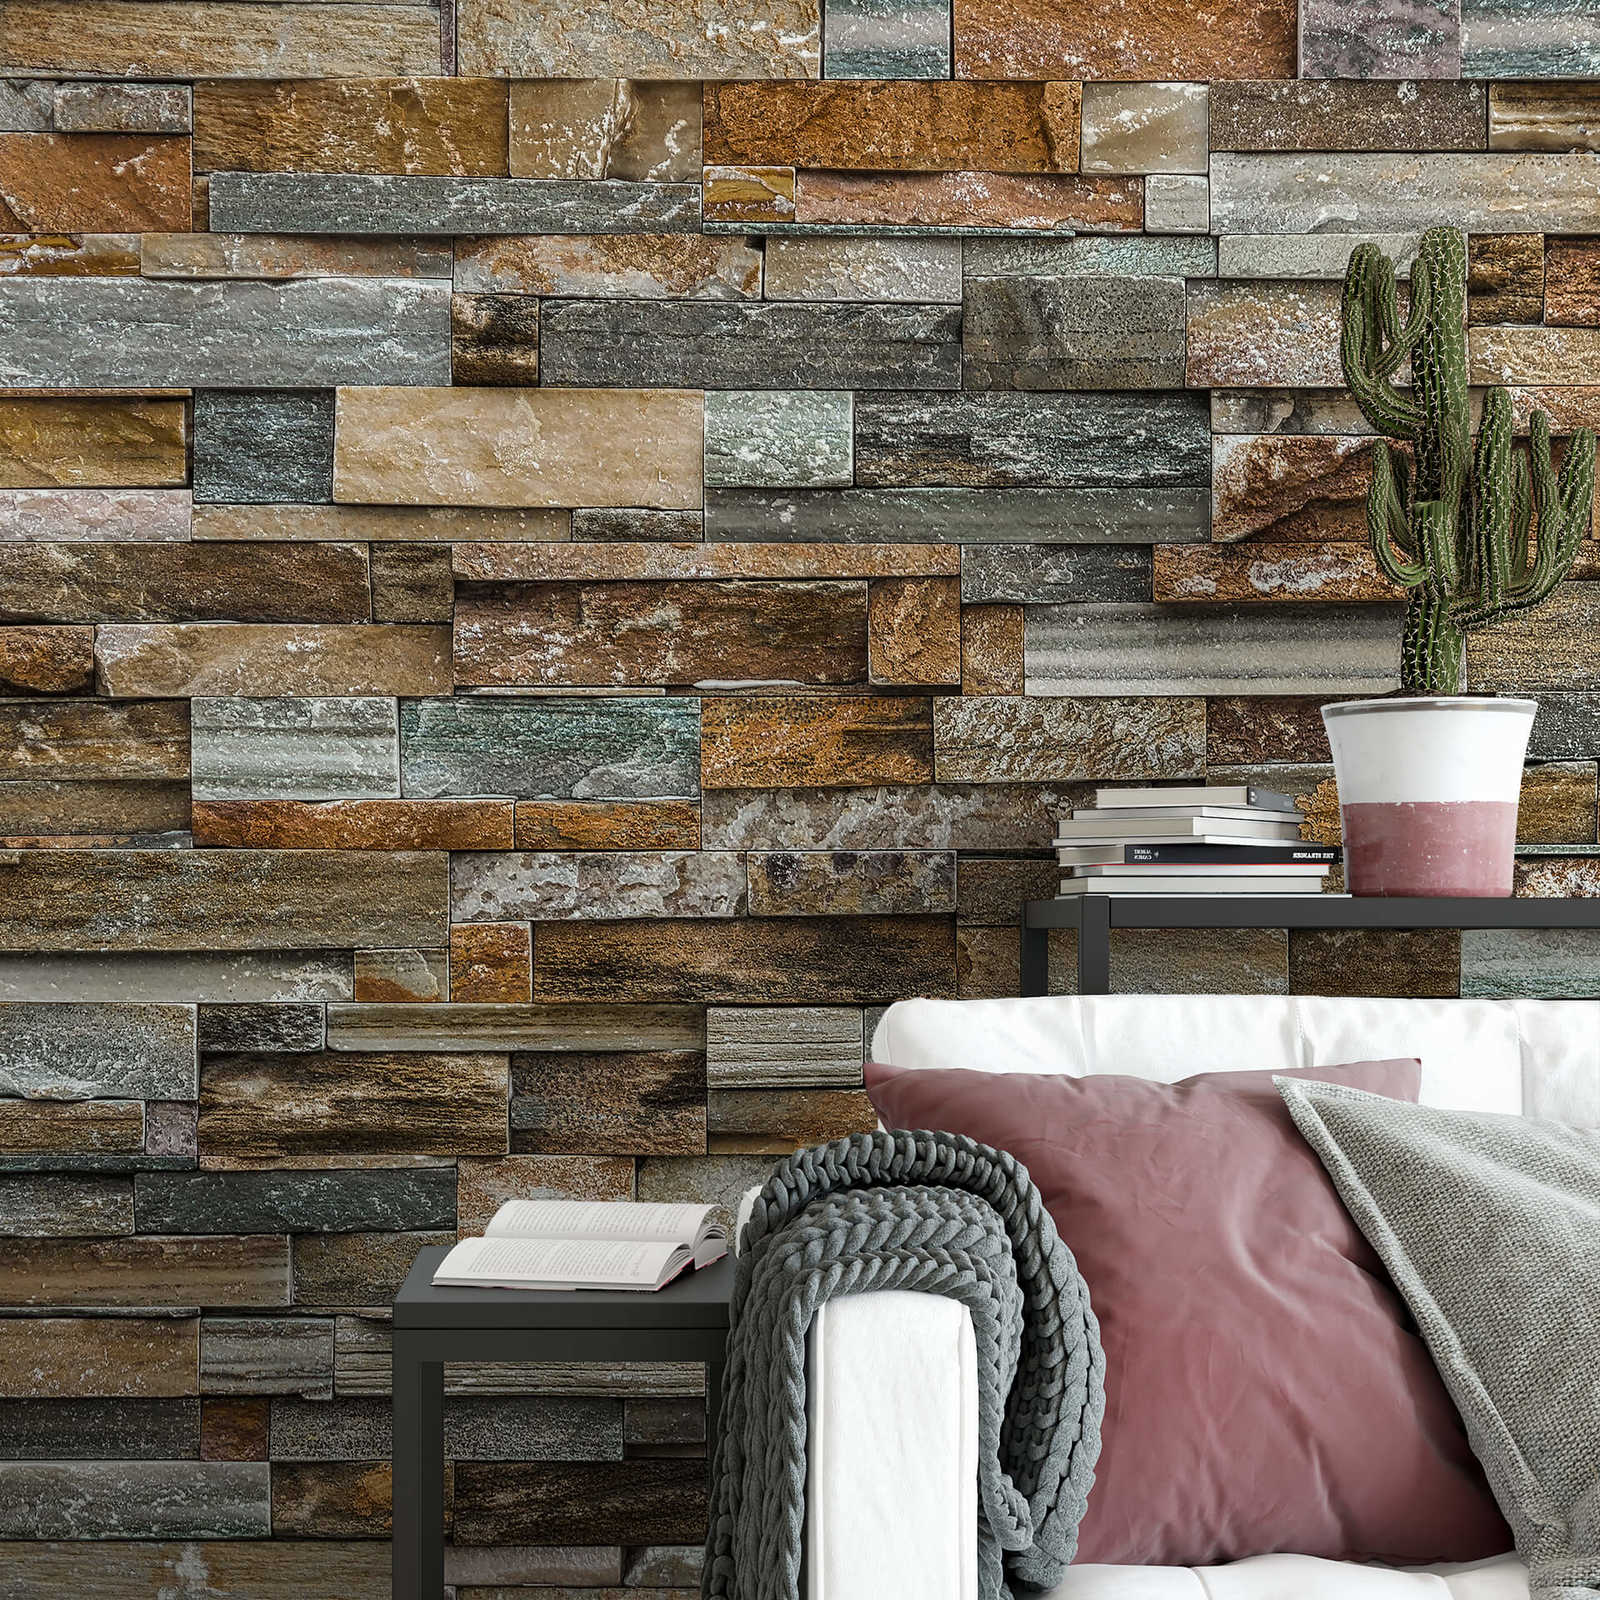             Stone wall mural with 3D brickwork - brown, grey
        